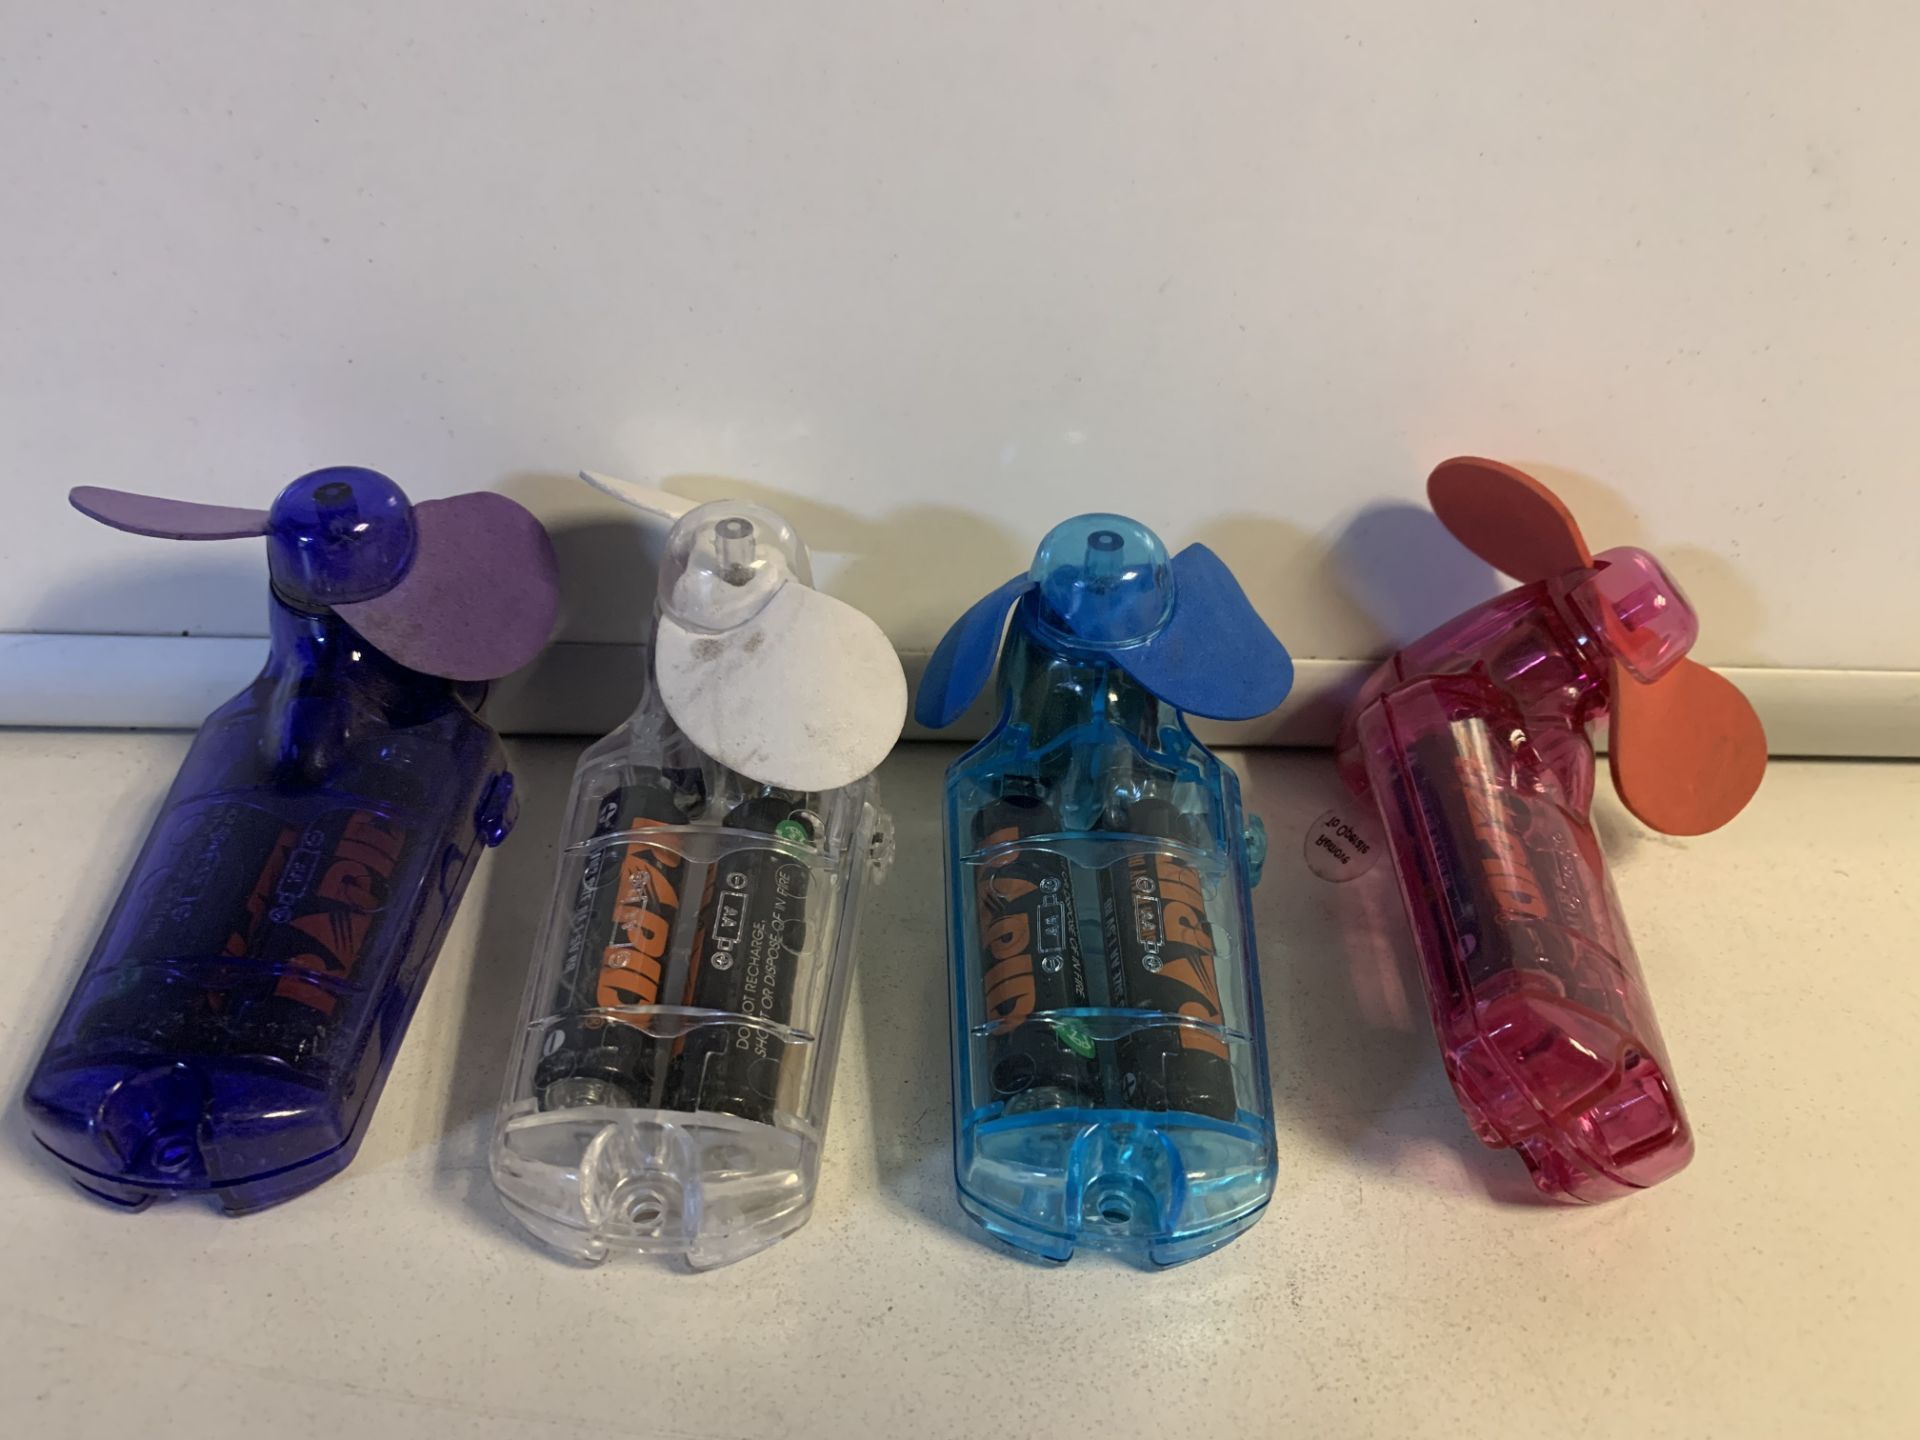 12 x NEW BATTERY POWERED MINI HAND HELD FANS (1756/28)